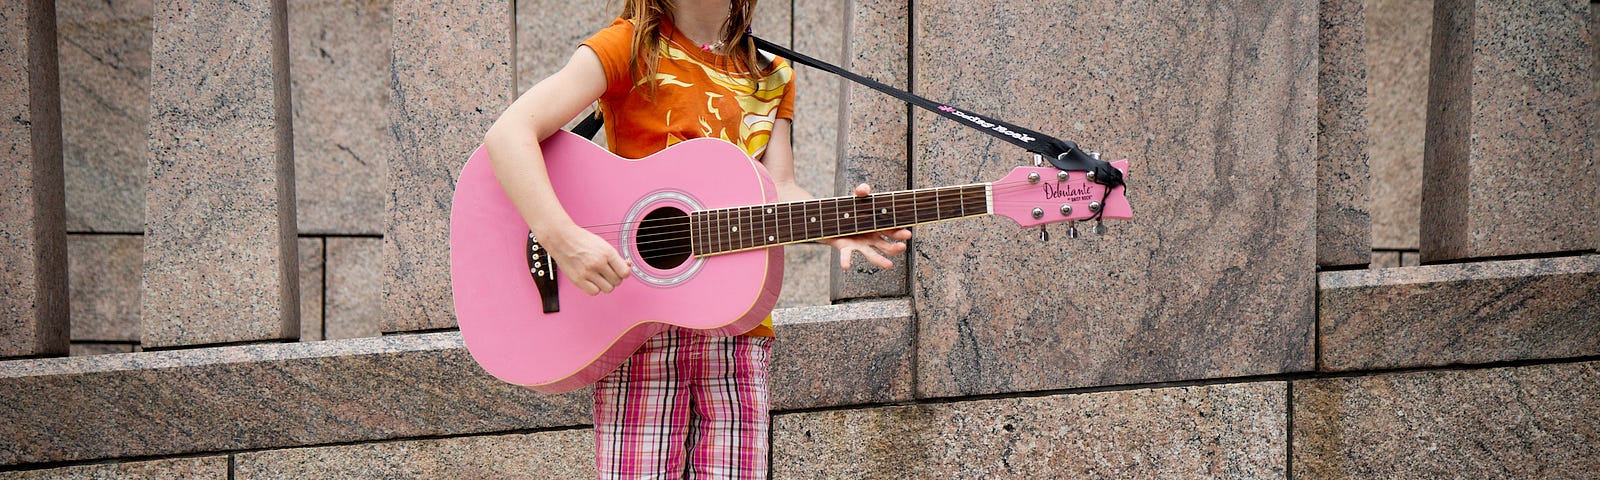 A red haired girl plays a pink guitar, singing her heart out on sidewalk venue!